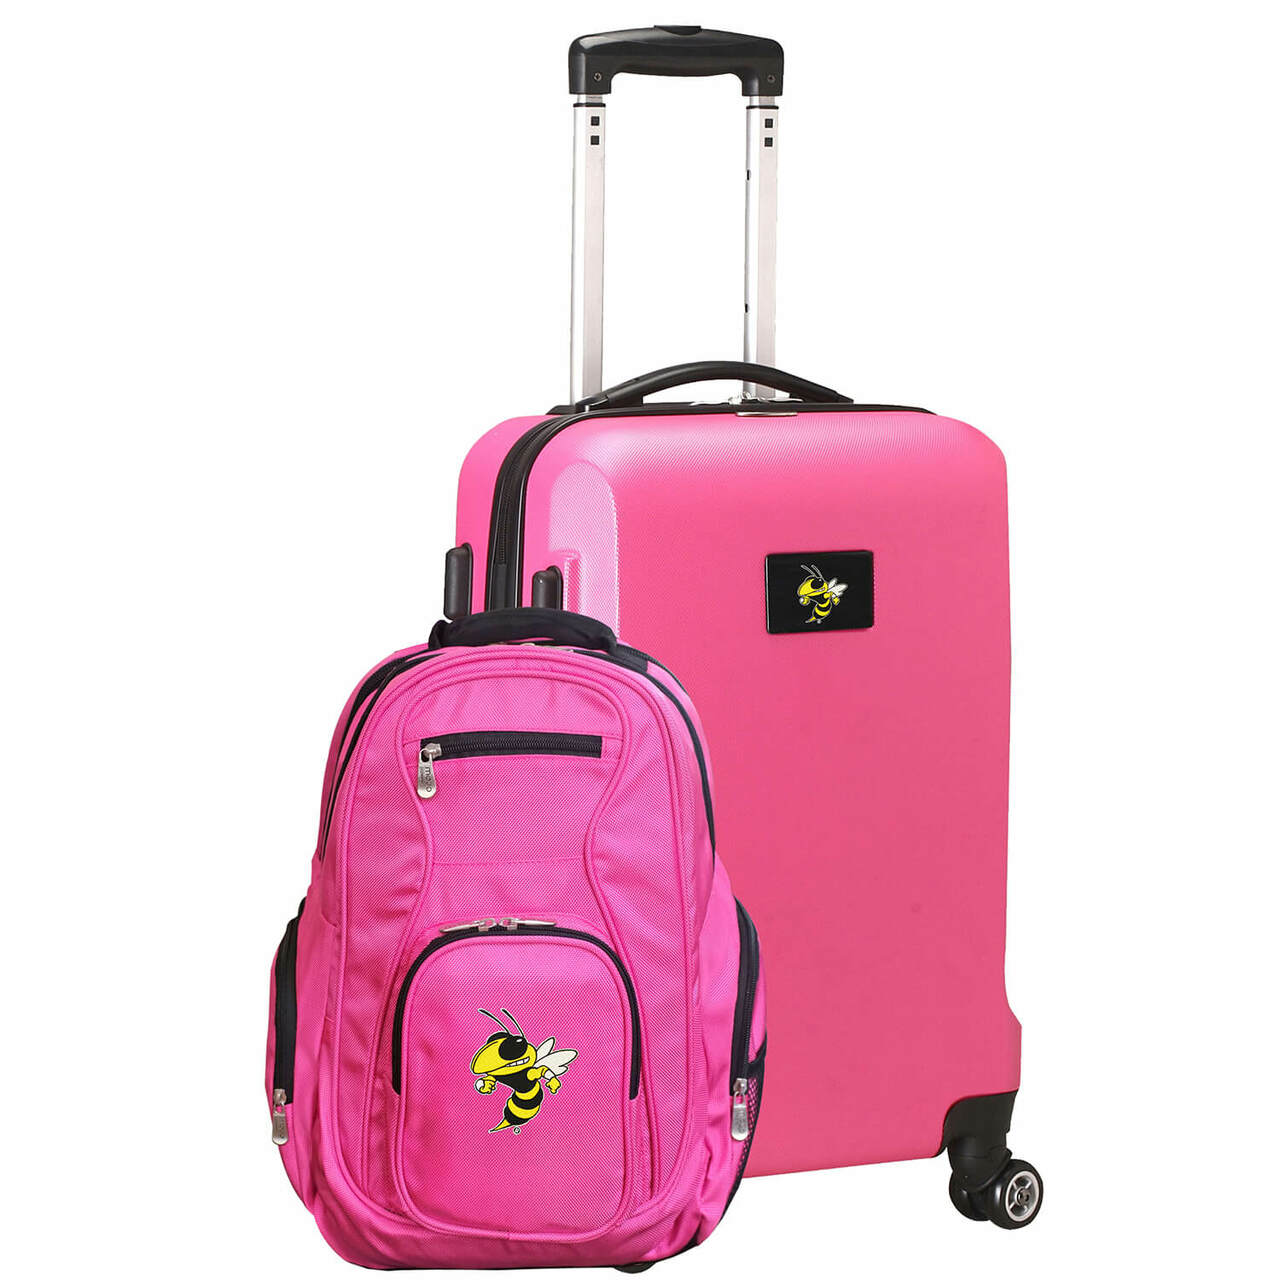 Georgia Tech Yellow Jackets Deluxe 2-Piece Backpack and Carry on Set in Pink